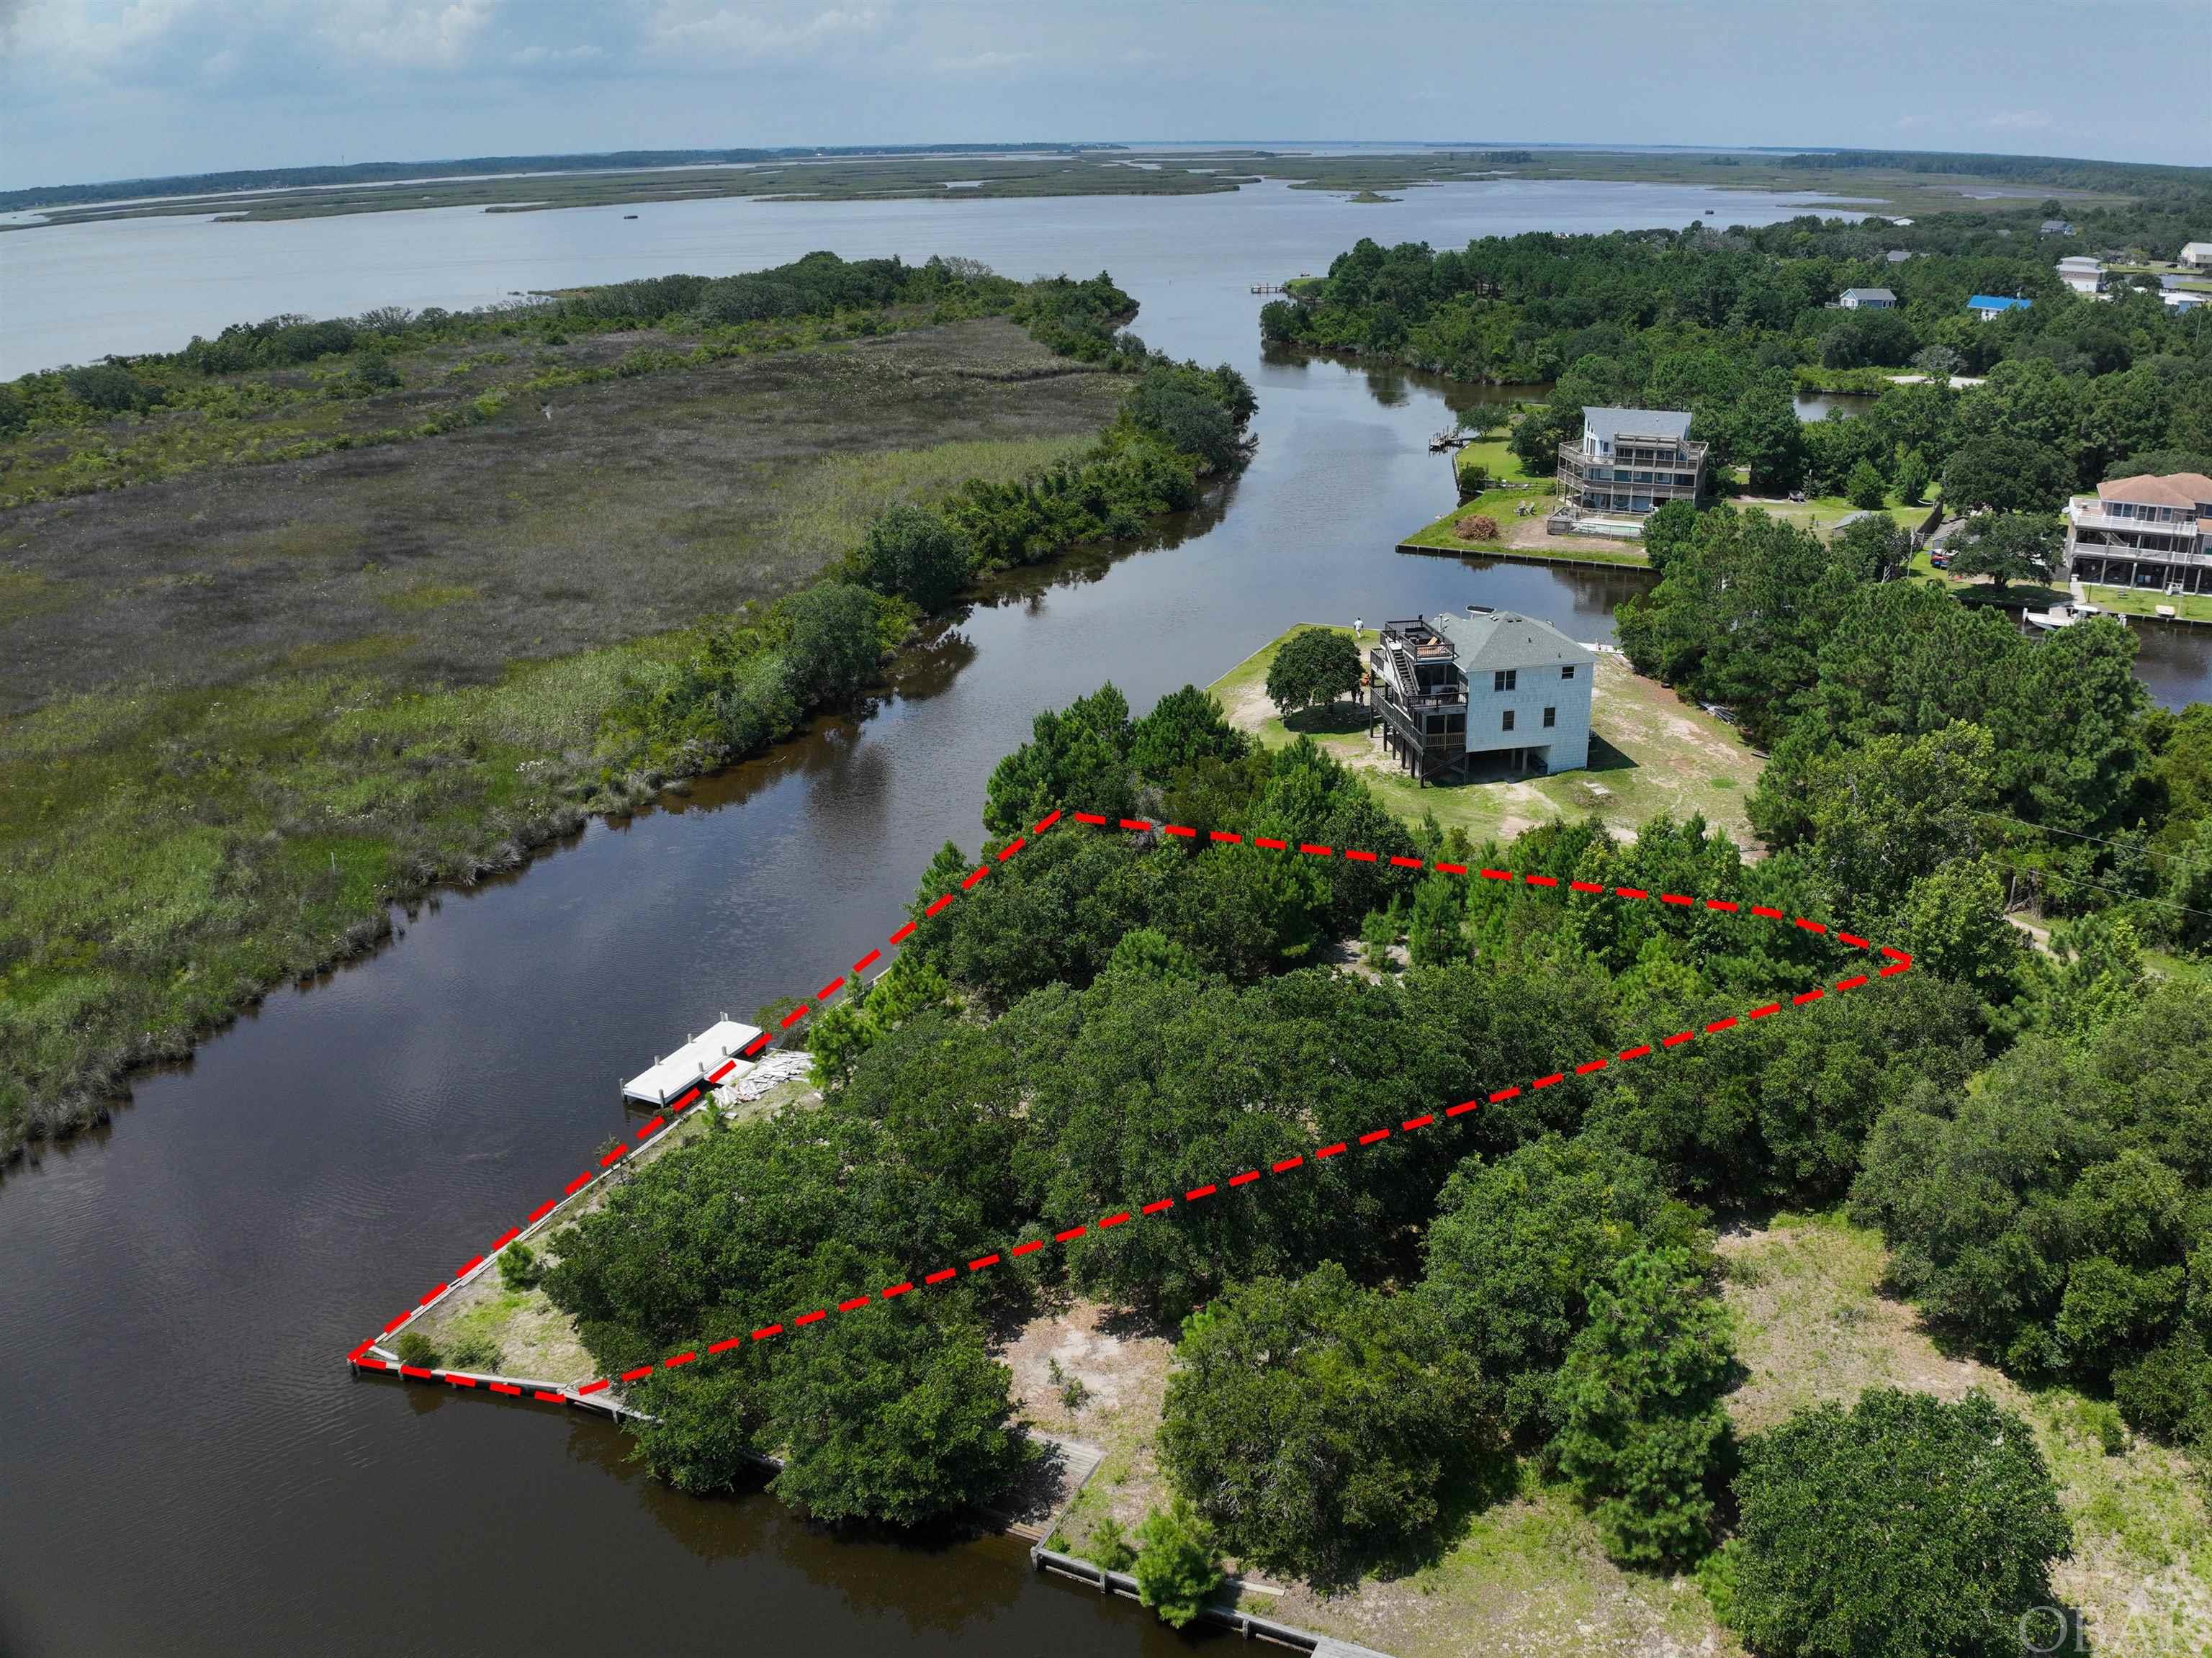 Looking for the ultimate waterfront retreat? Look no further! This rare and secluded over-sized lot is the perfect spot to build your dream home. Located at the end of a cul-de-sac and just steps away from the entrance to the sound, this lot offers wide open views across the water with nothing but federal land across the canal. Imagine enjoying the sound for the Corolla Wild Horses is your yard and the sun setting over the water in the evening. With its prime location and breathtaking views, this lot is truly one of a kind. Don't miss this amazing opportunity to own a piece of paradise - act now!